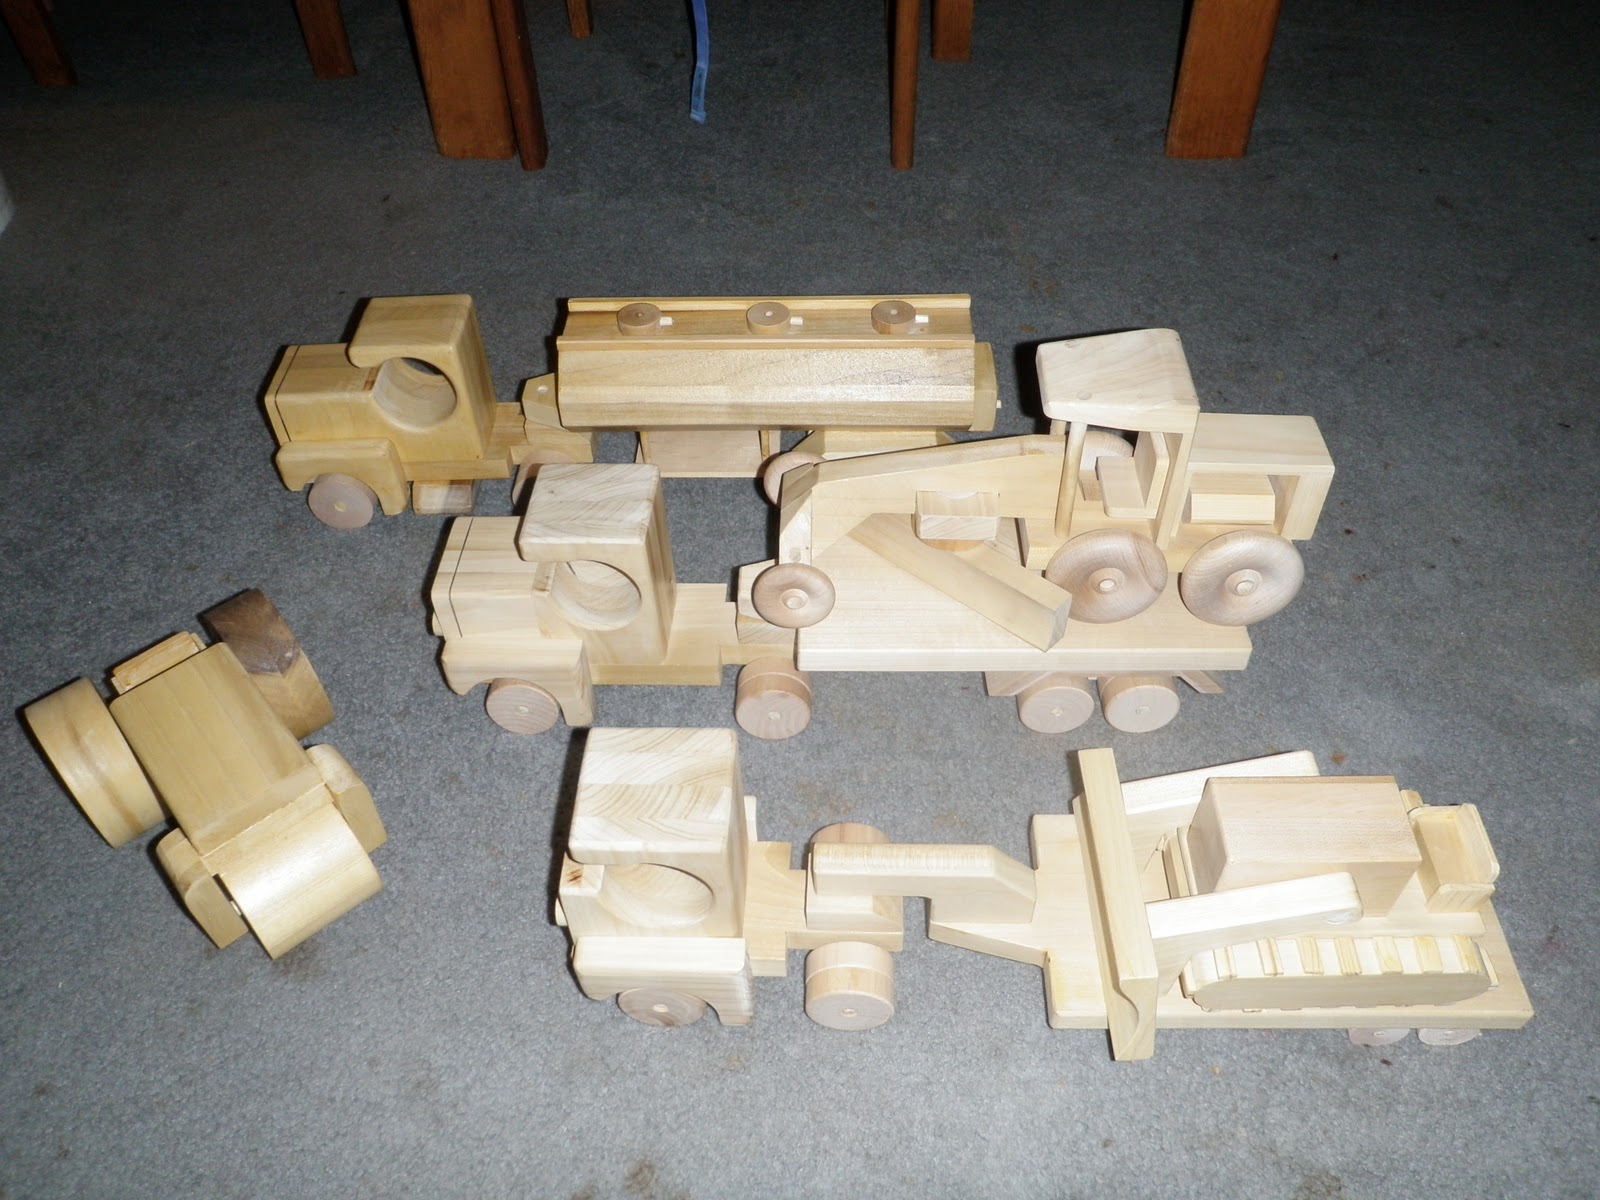 Wood Project Ideas: Wooden toy truck plans free